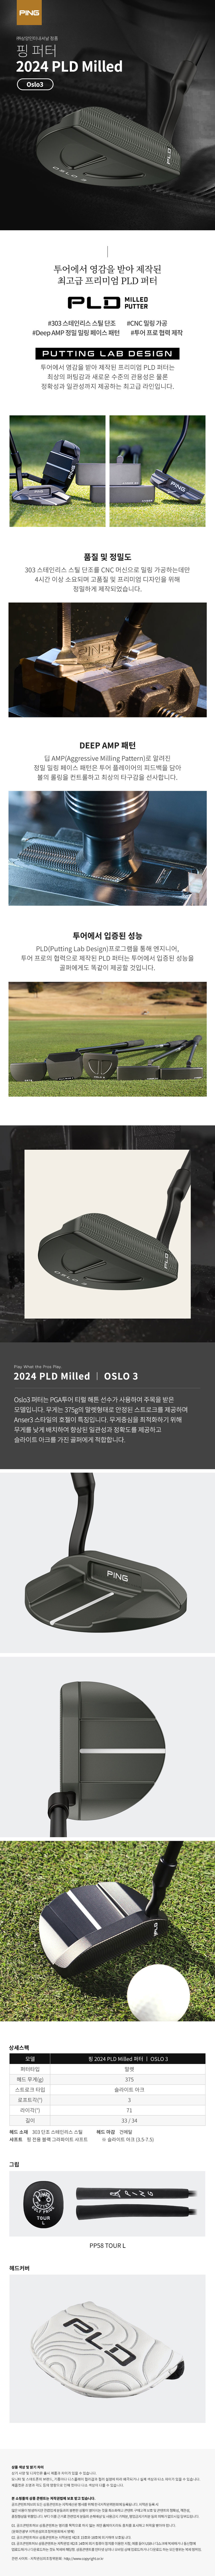 ping_milled_oslo_3_putter_24.jpg